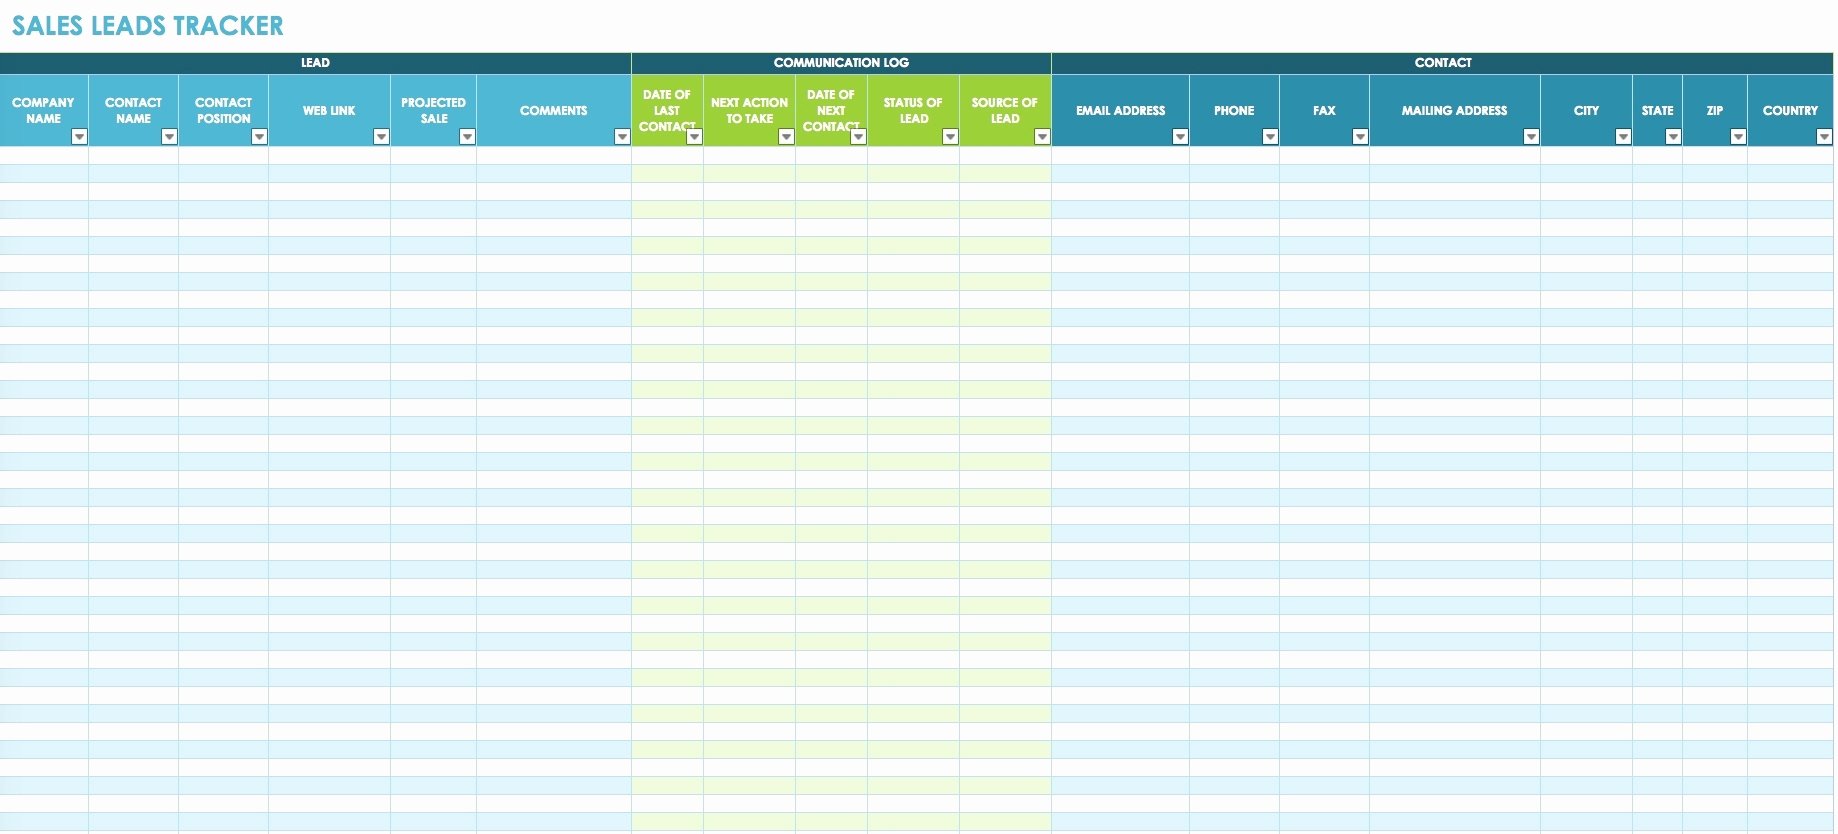 Sales Lead Tracking Template Luxury Tracking Sales Leads Spreadsheet Tracking Spreadshee